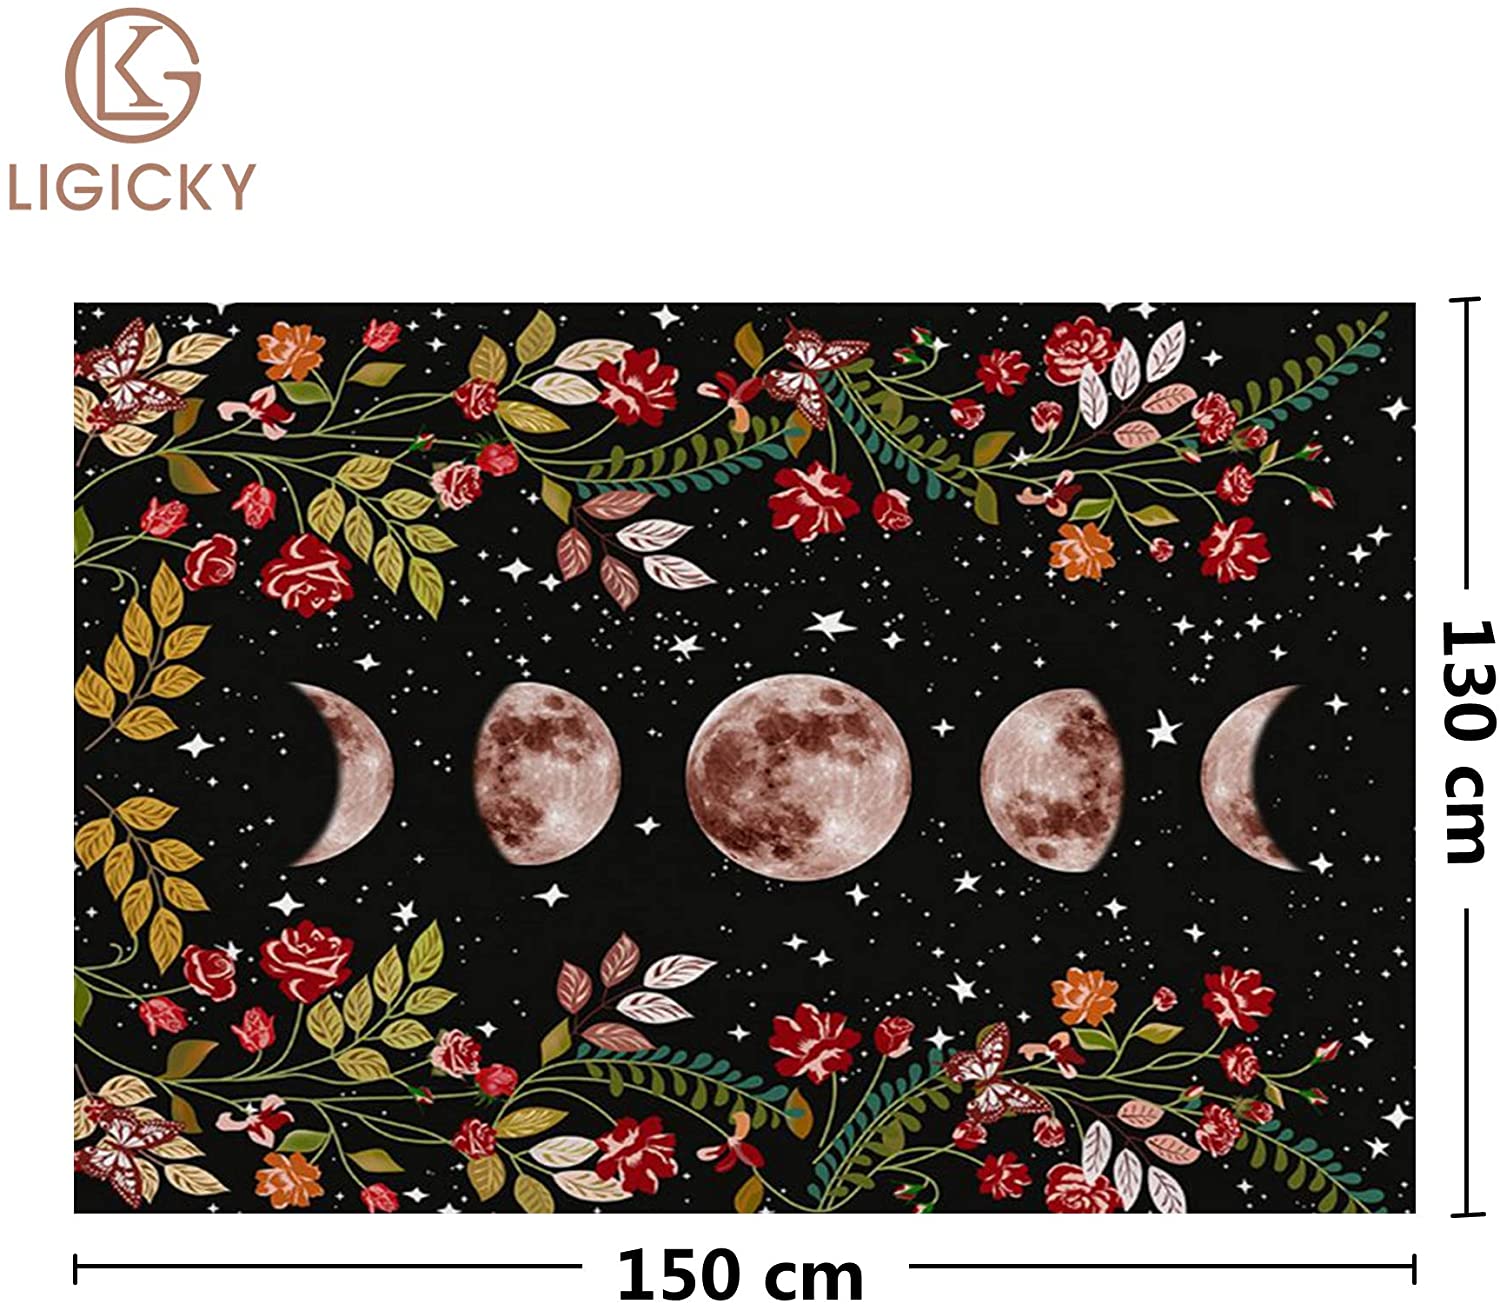 Moth Tapestry Moon Phase Tapestry Psychedelic Eyes Tapestry Moon and Stars Tapestry Black and White Tapestry Wall Hanging for Room 51.2 x 59.1 inches